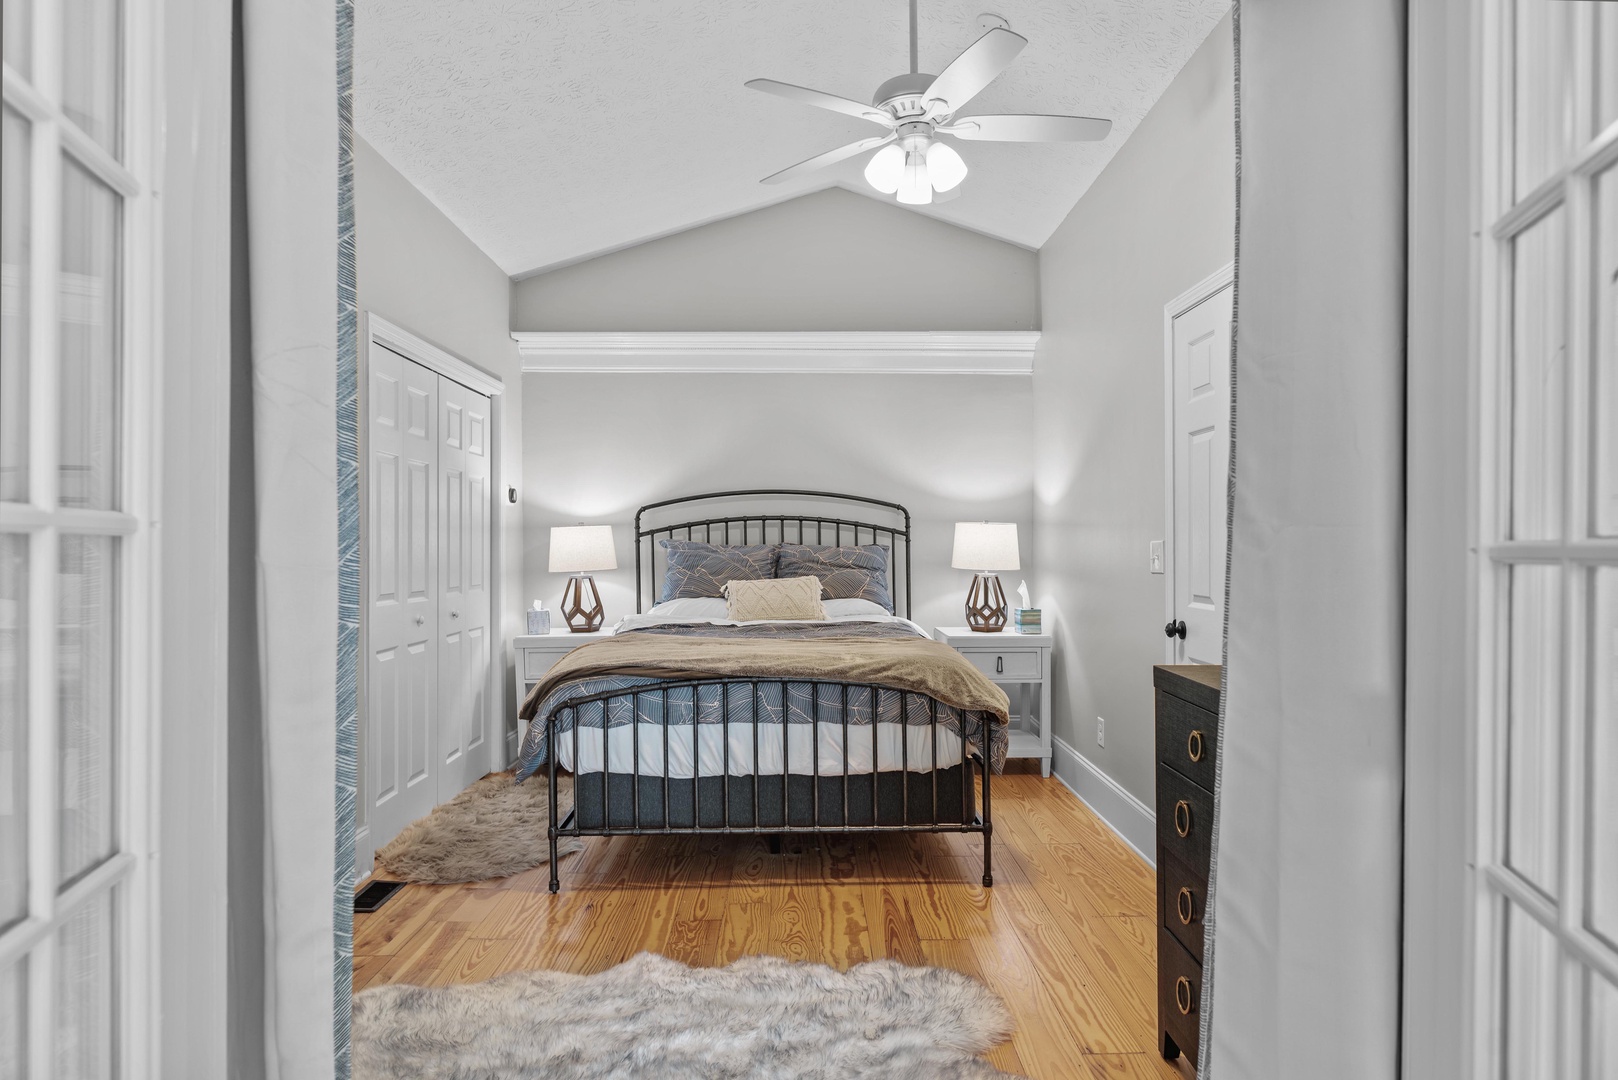 The primary bedroom offers a queen bed, ceiling fan, & sunroom access